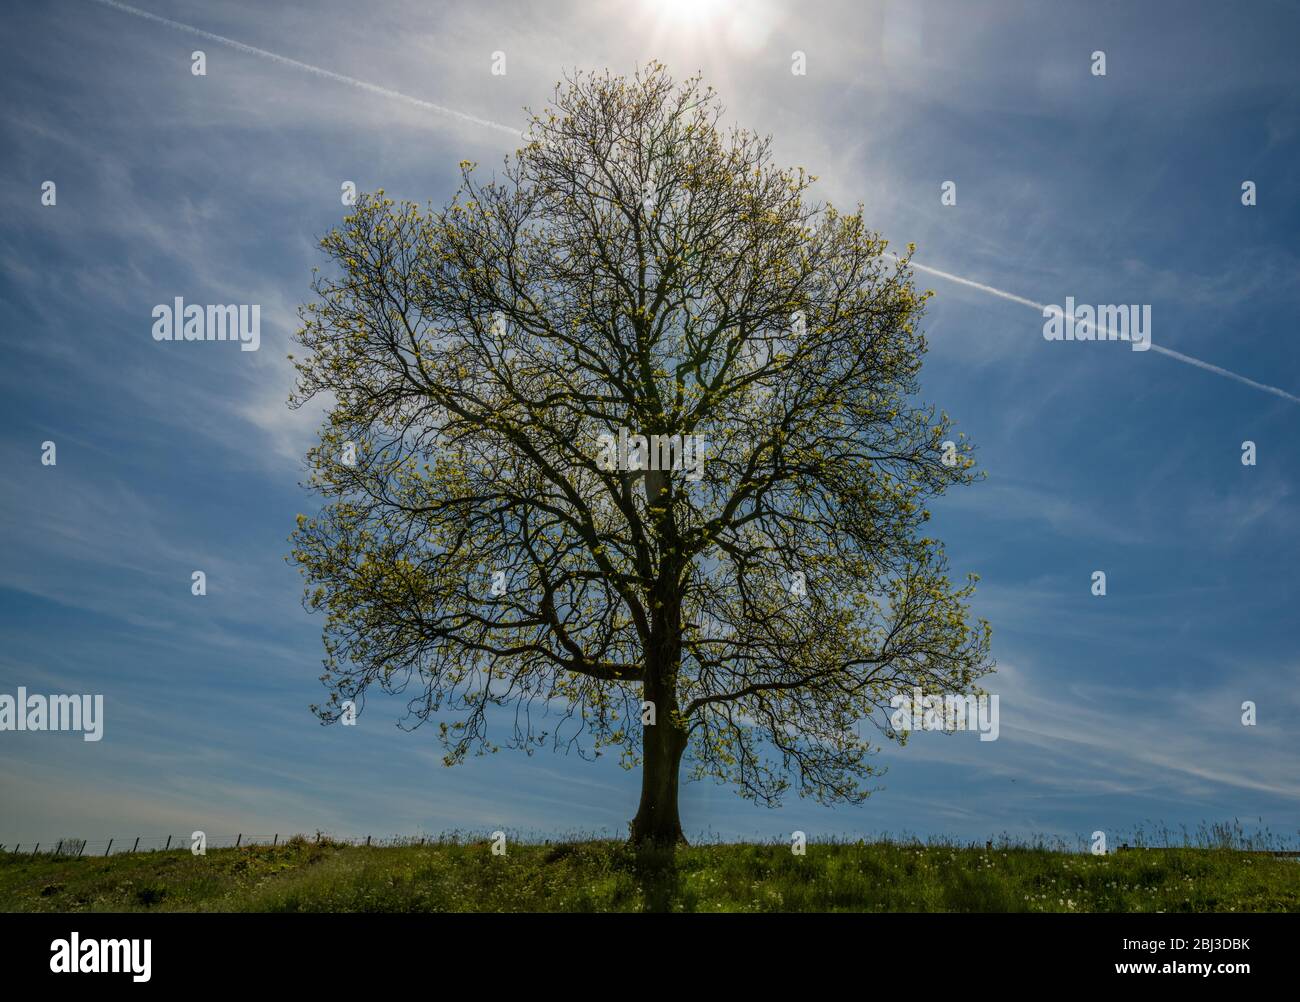 Single tree in summer with aircraft contrail, England, United Kingdom Stock Photo